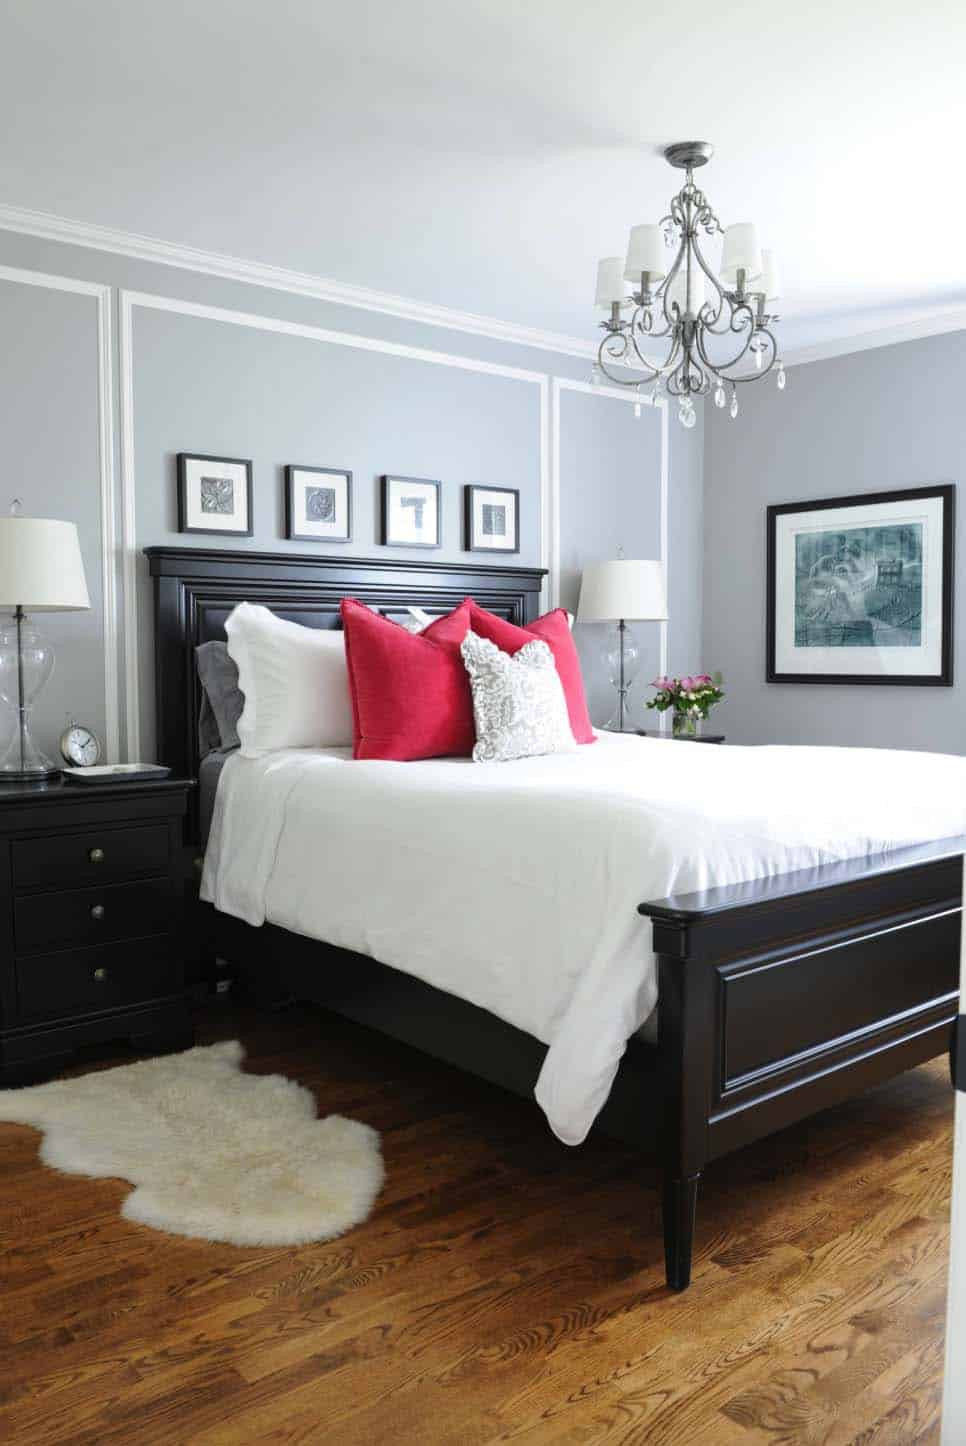 Master Bedroom Paint
 25 Absolutely stunning master bedroom color scheme ideas